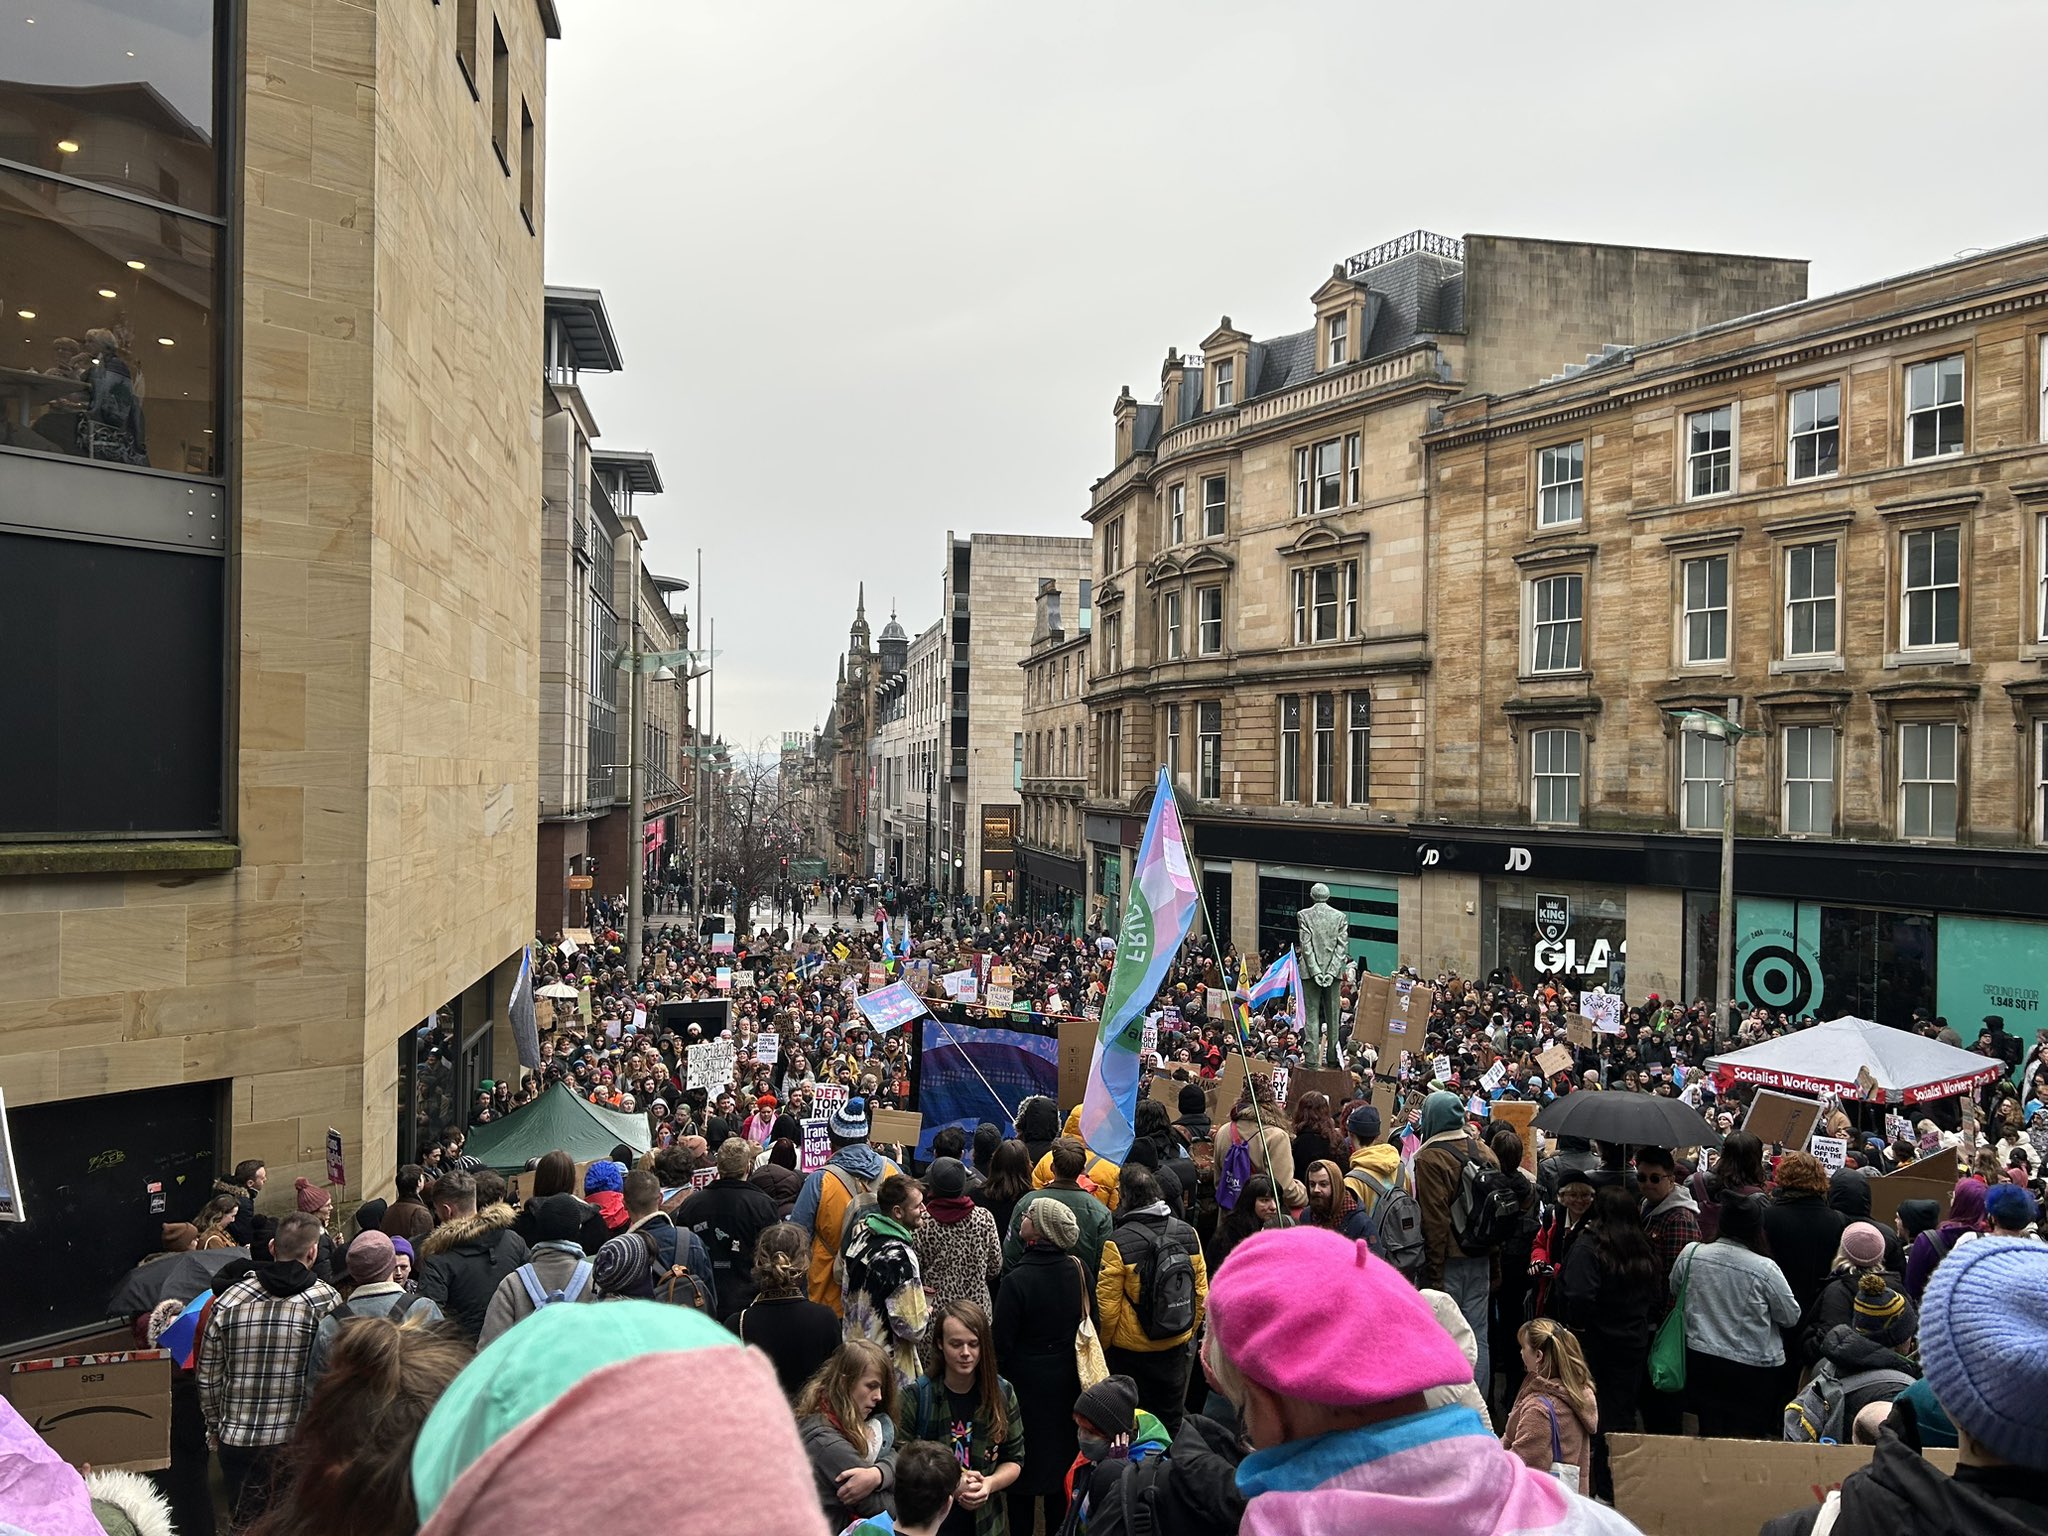 A photo of the crowd gathered in Glasgow in support of Scottish democracy and trans rights. Photo by Max @SpillerOfTea on Twitter